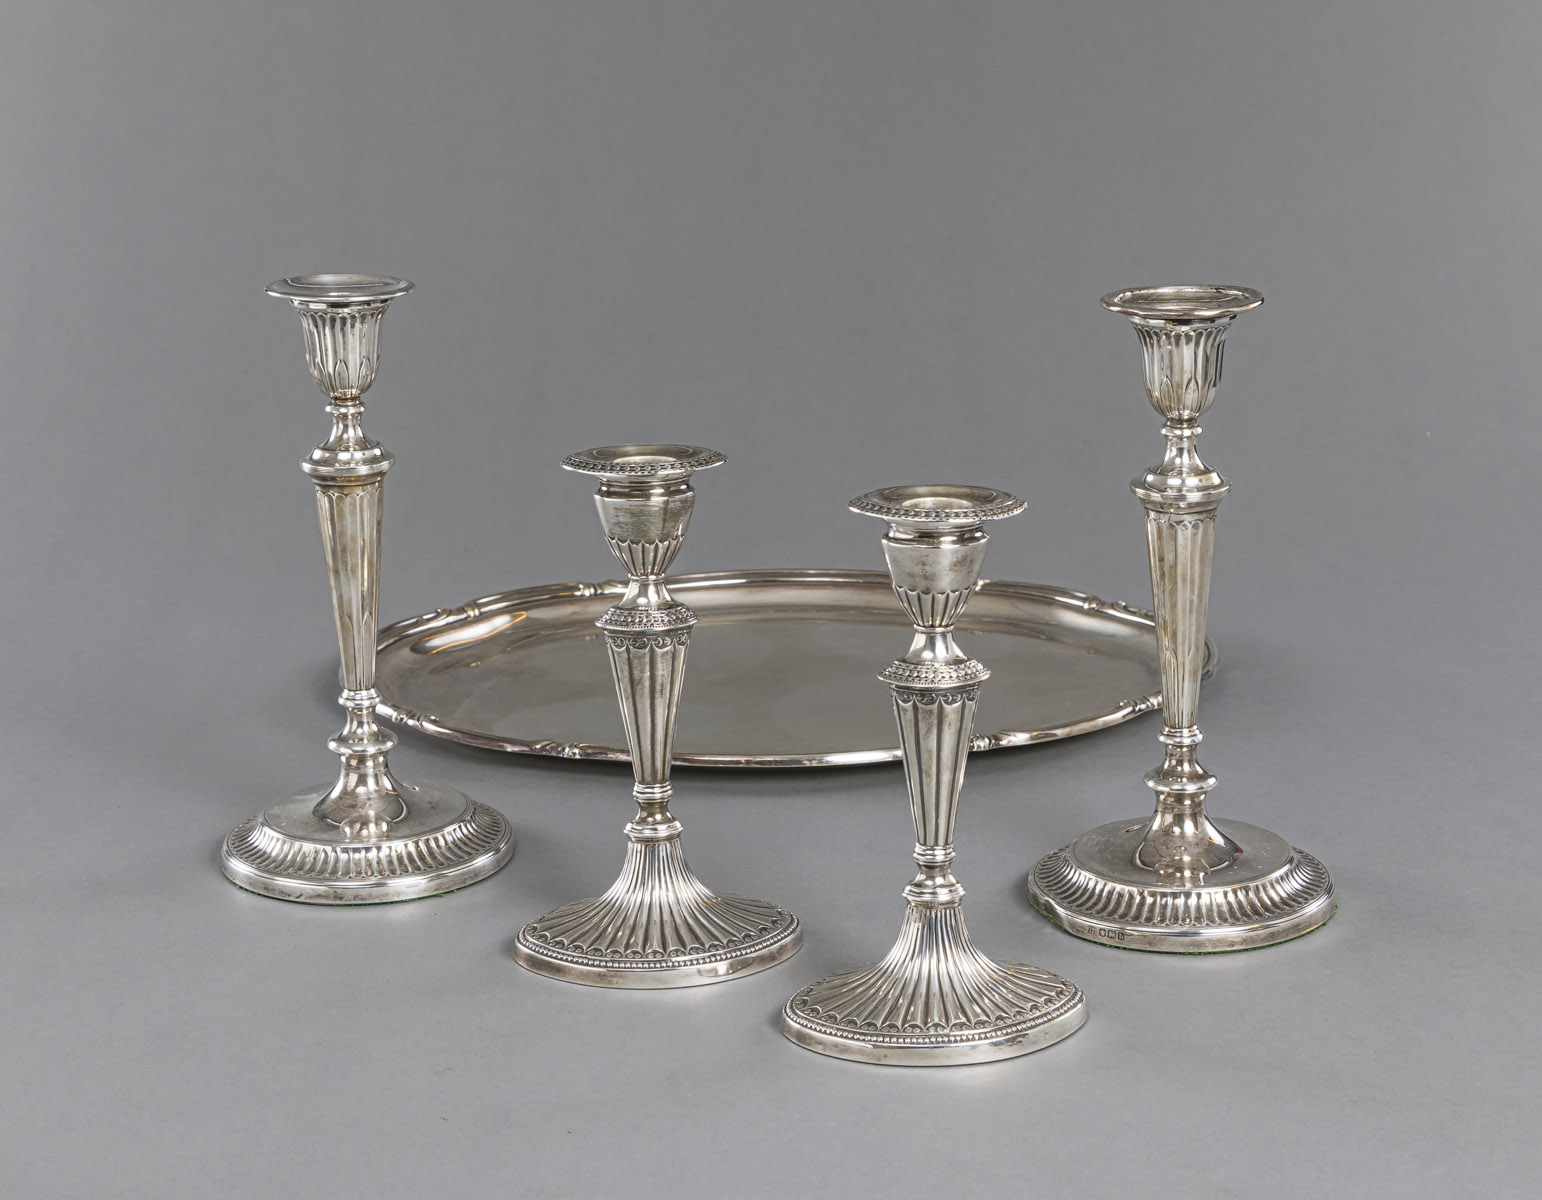 TWO PAIR OF LONDON SILVER CANDLESTICKS AND A GERMAN TRAY - Image 3 of 8